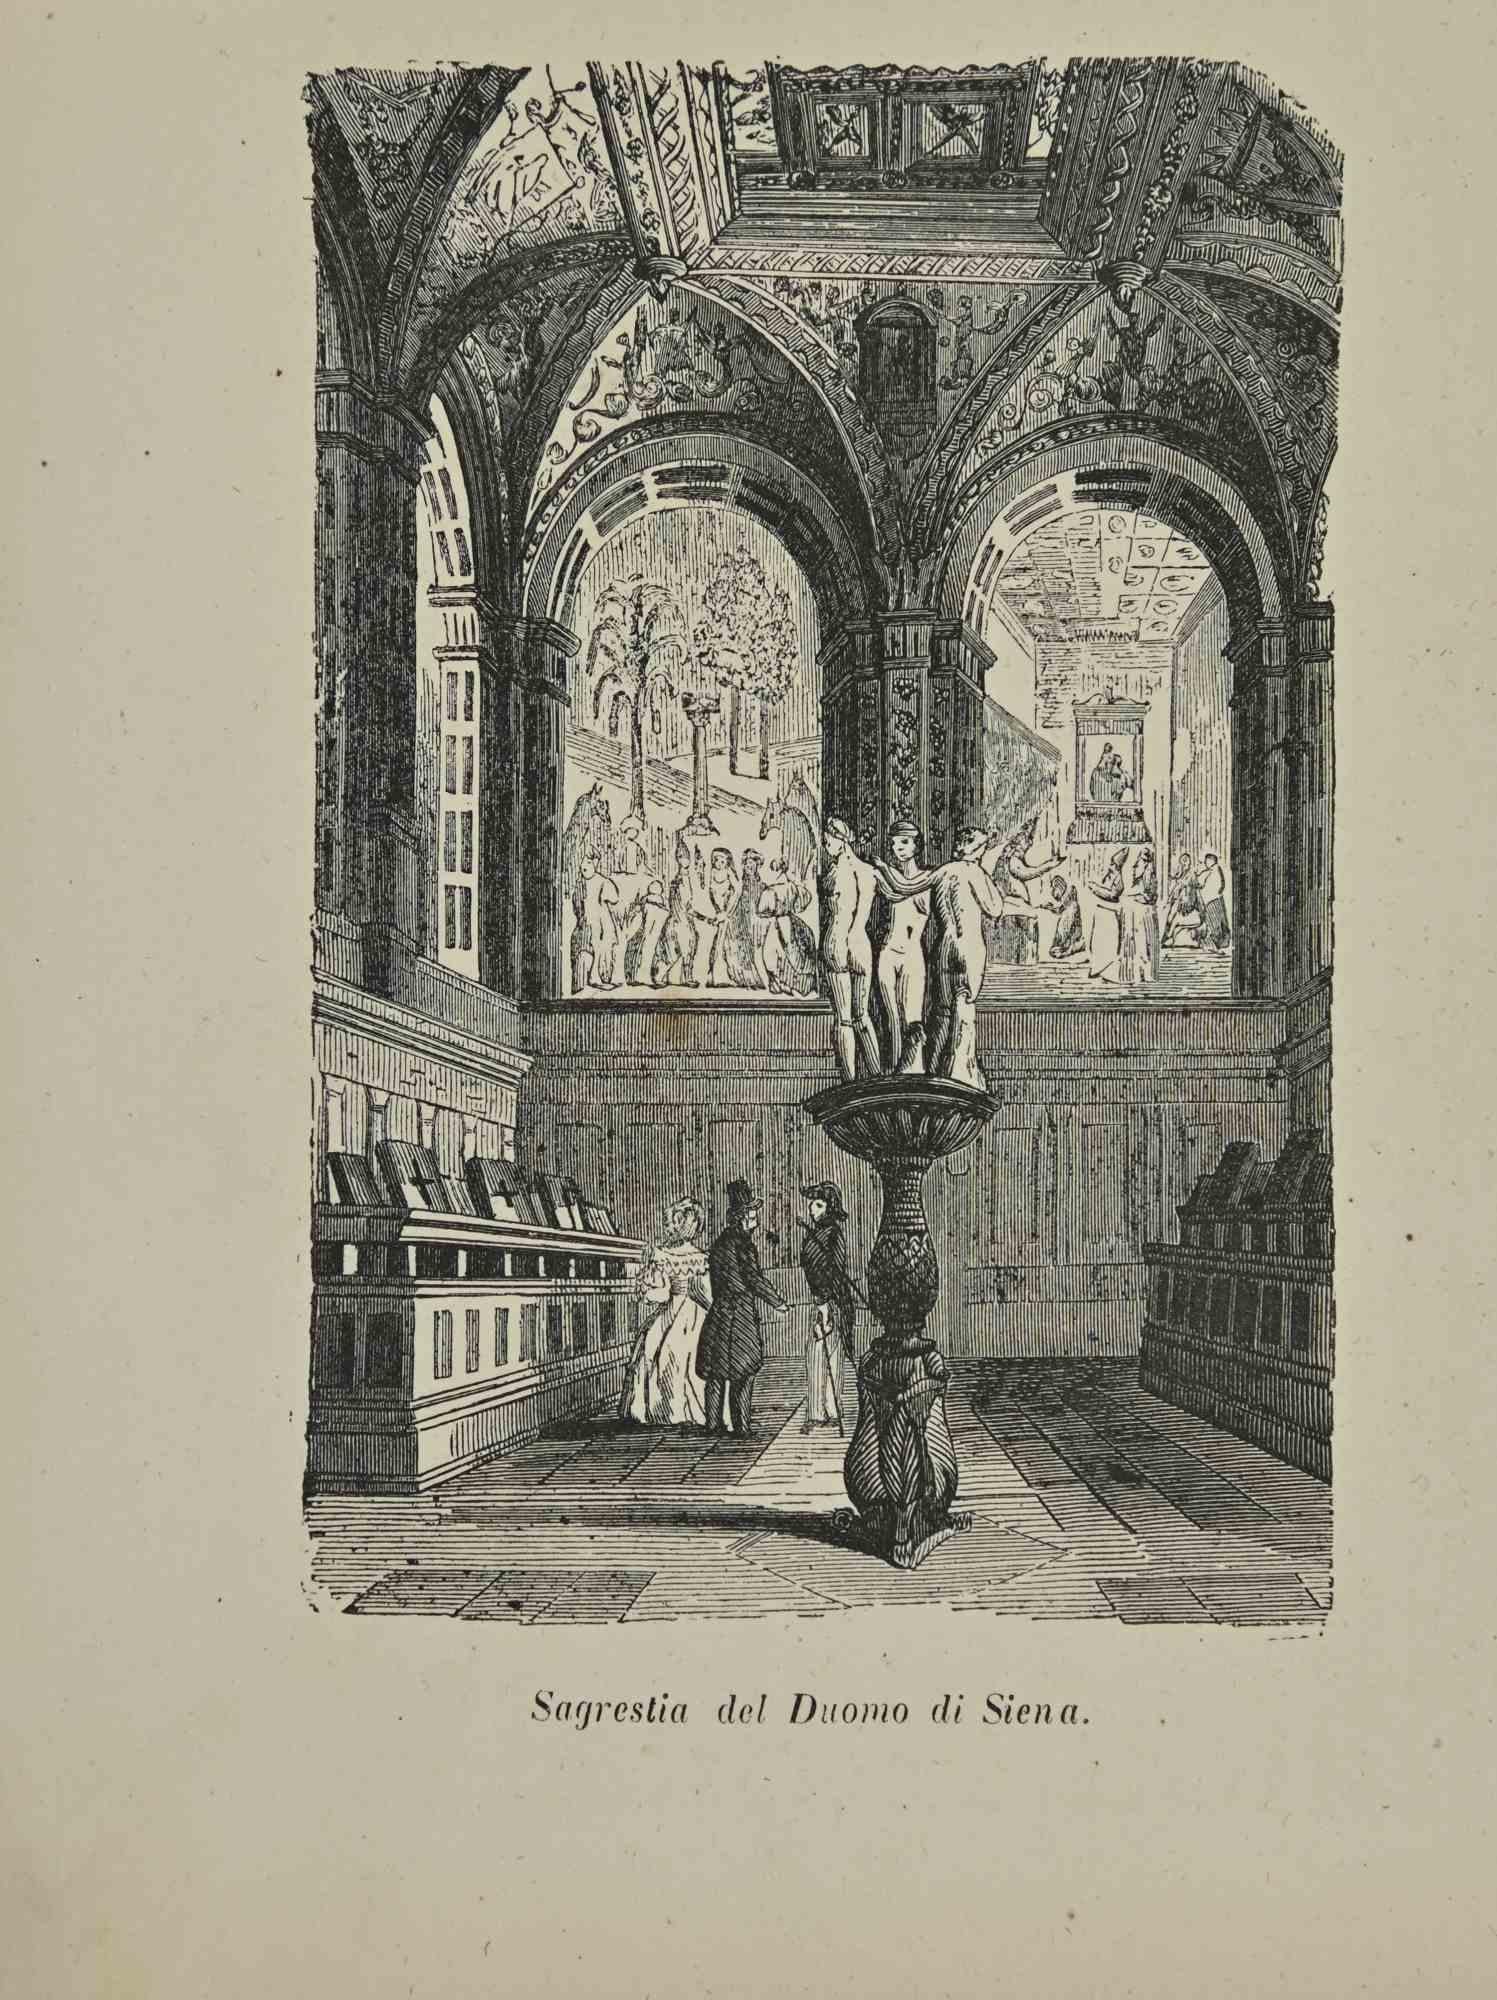 Uses and Customs - Sacristy of the Cathedral in Siena - Lithographie - 1862